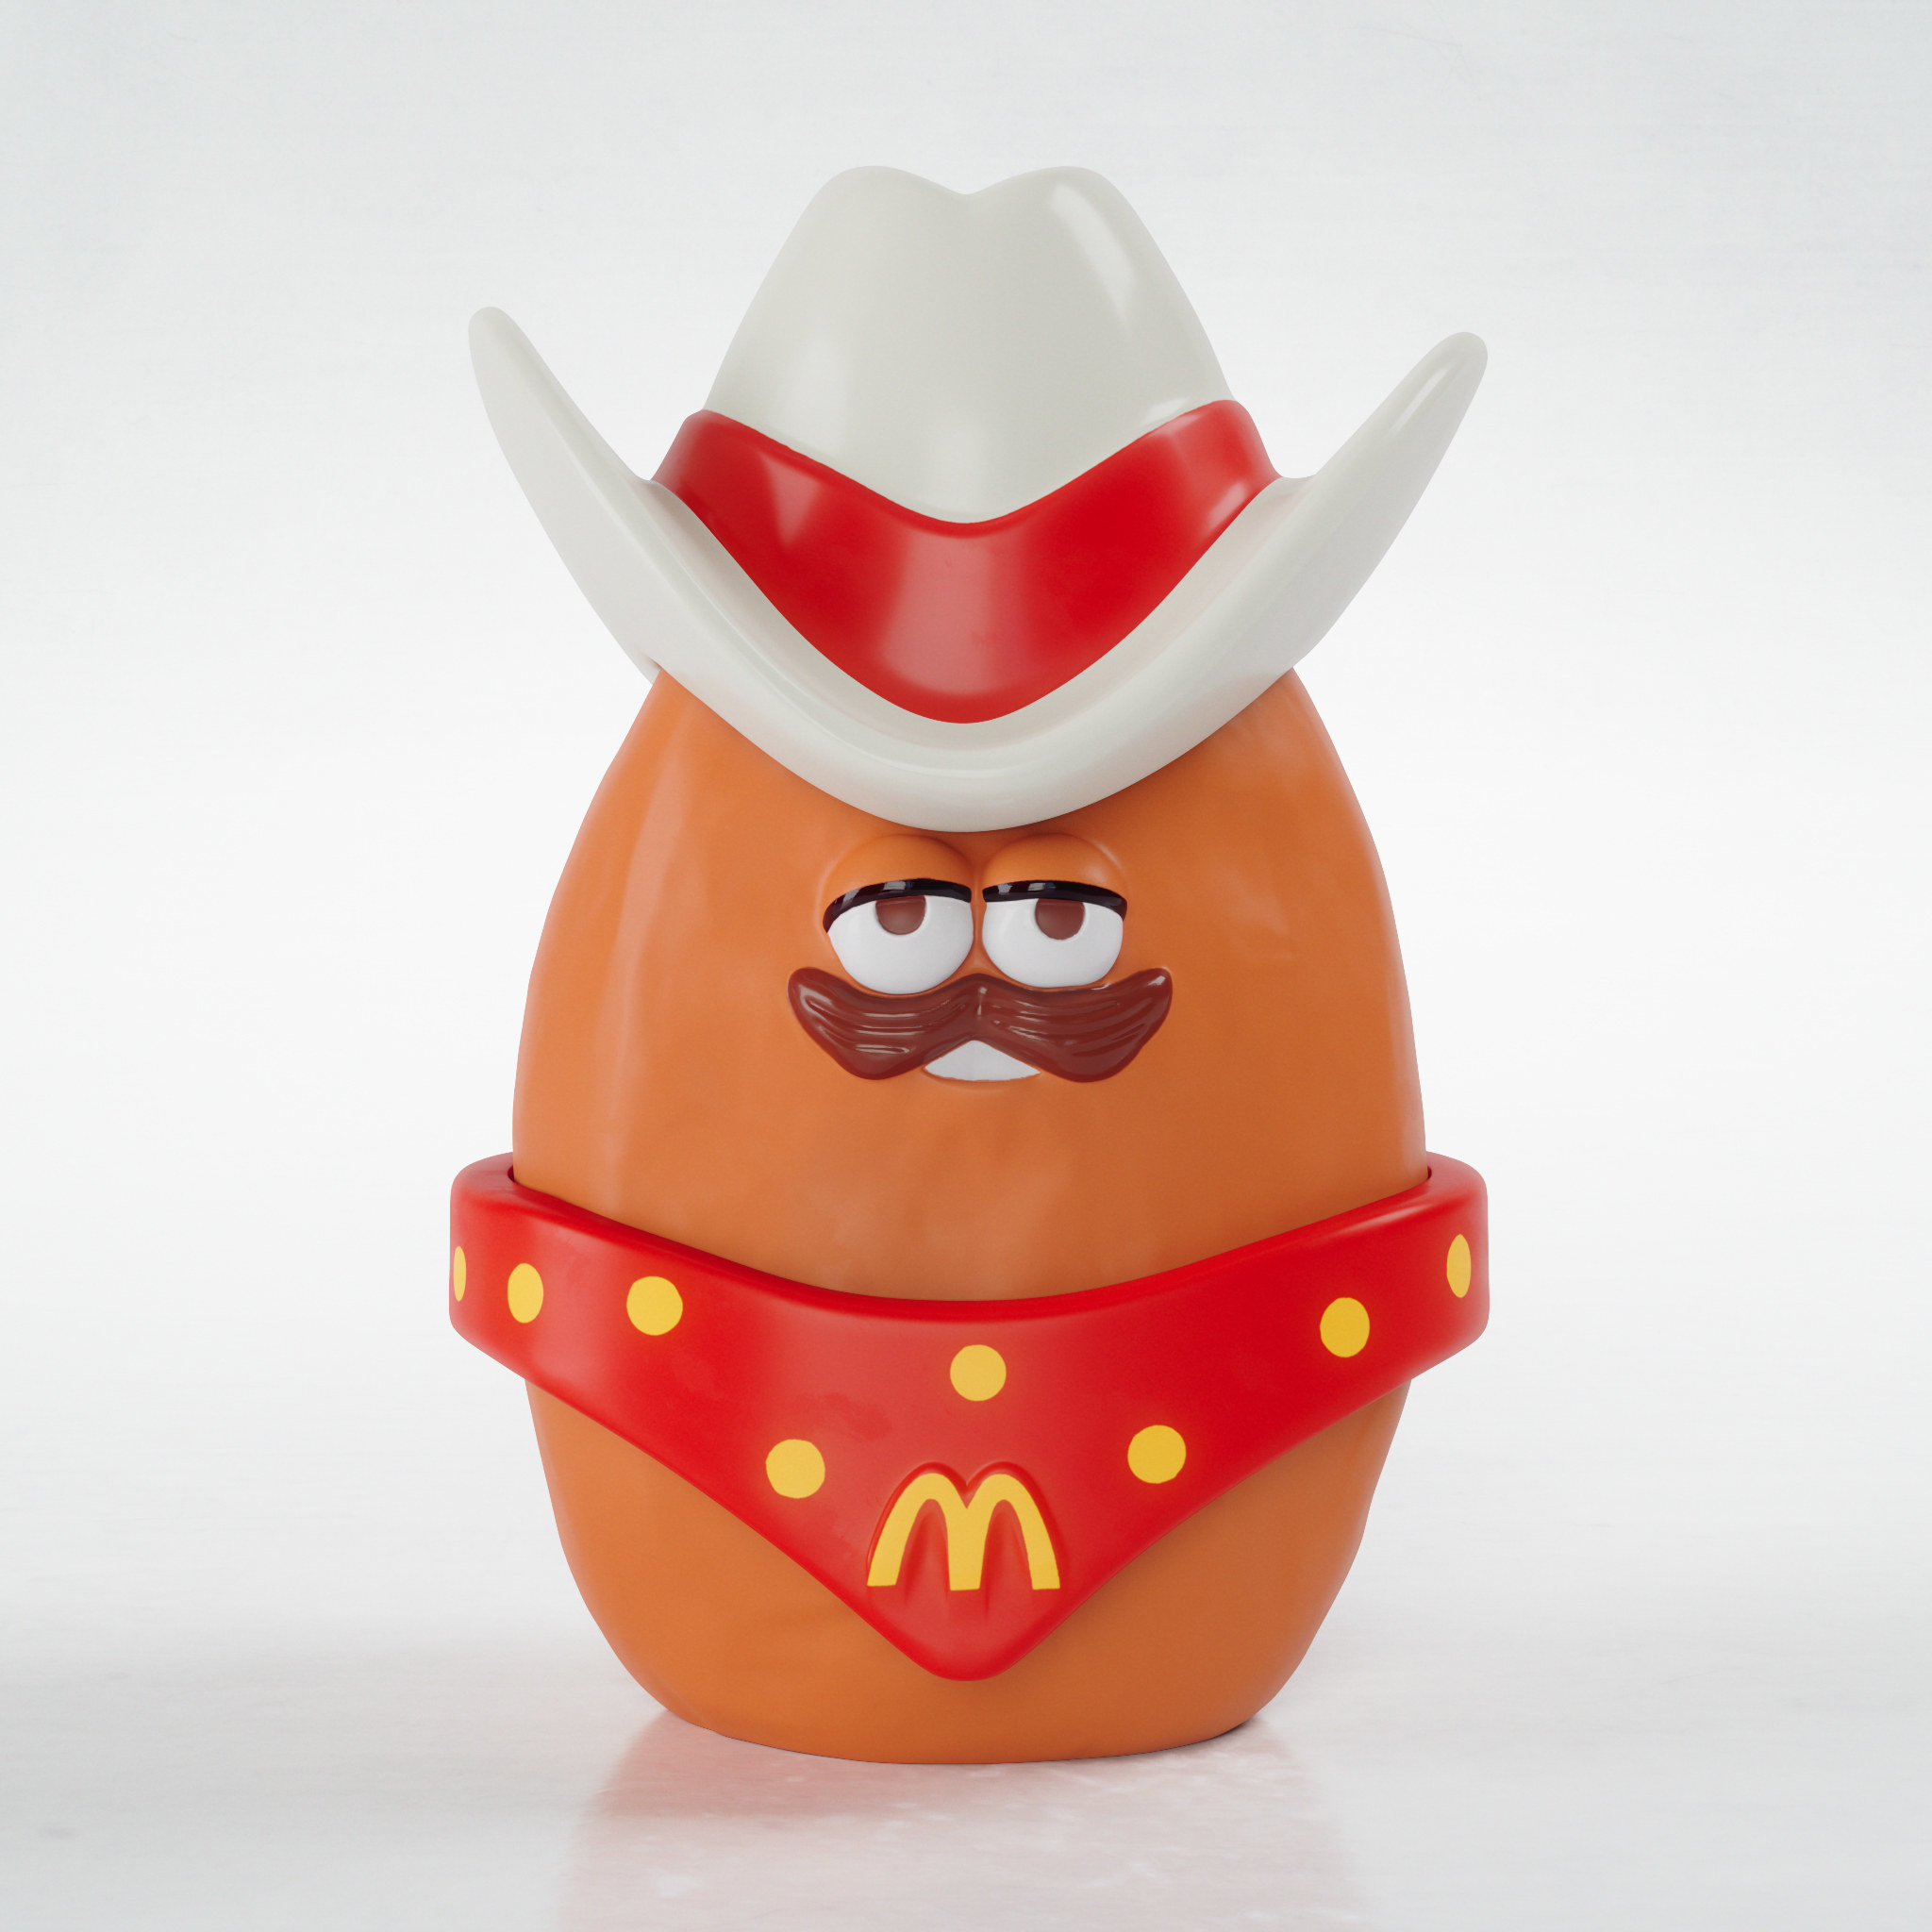 McDonald's Is Bringing Back Retro Happy Meal Toys